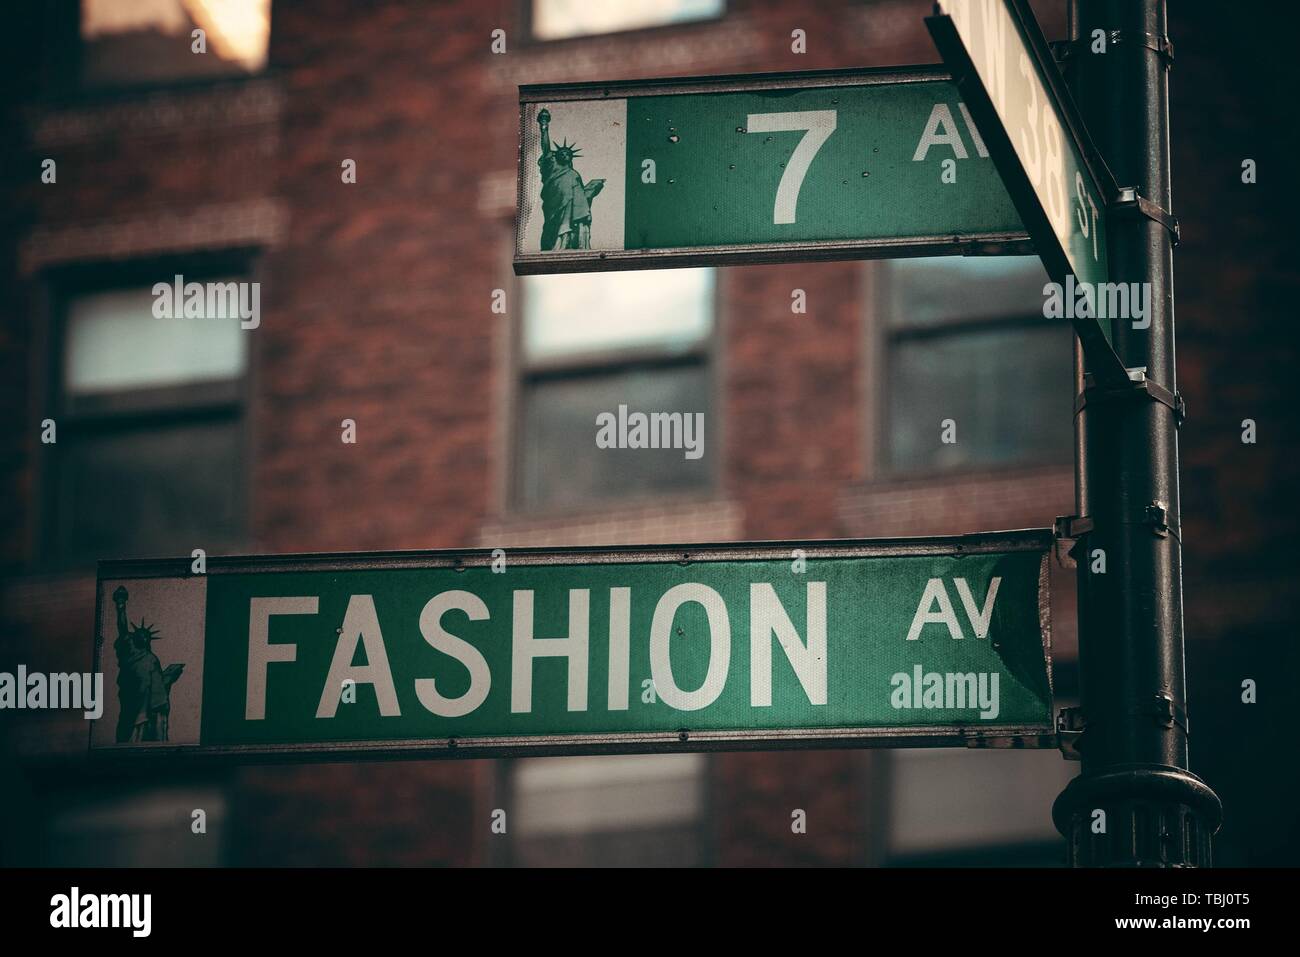 NEW YORK CITY - FEB 19: Fashion avenue street view on February 19, 2014 in Manhattan, New York City. With population of 8.4M, it is the most populous city in the United States. Stock Photo